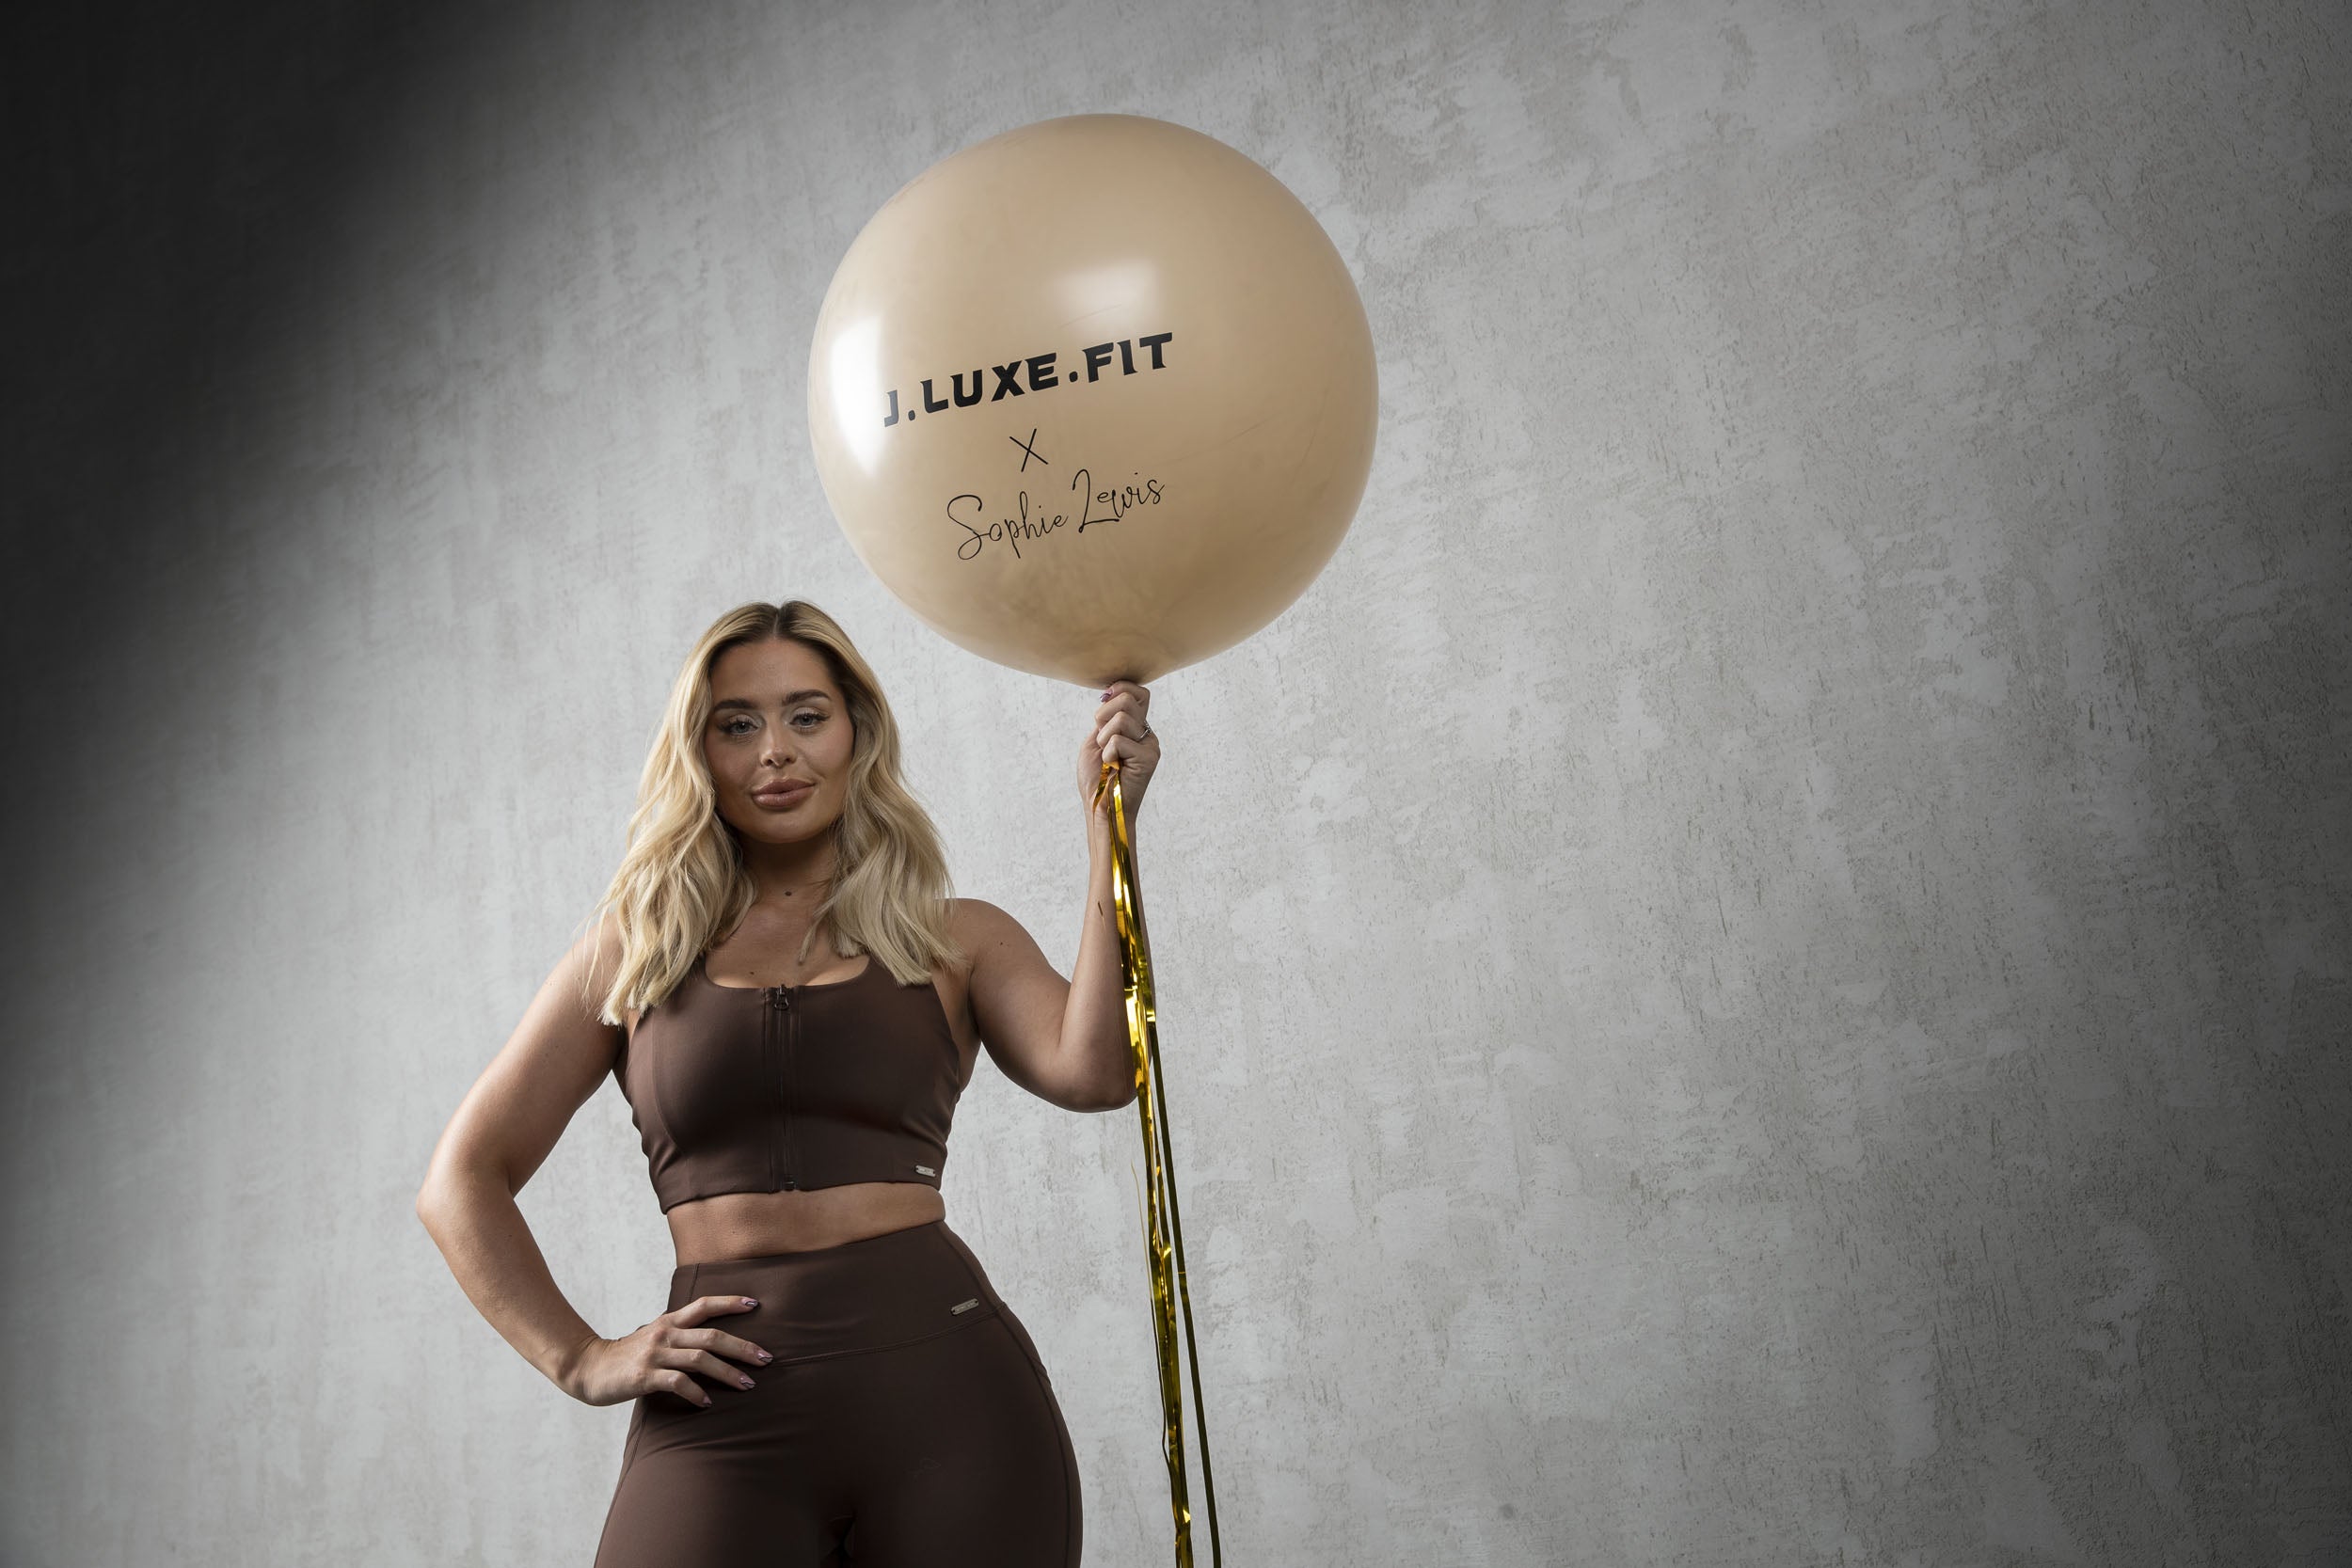 Sophie Lewis x J.LUXE.FIT - Influencer Collection